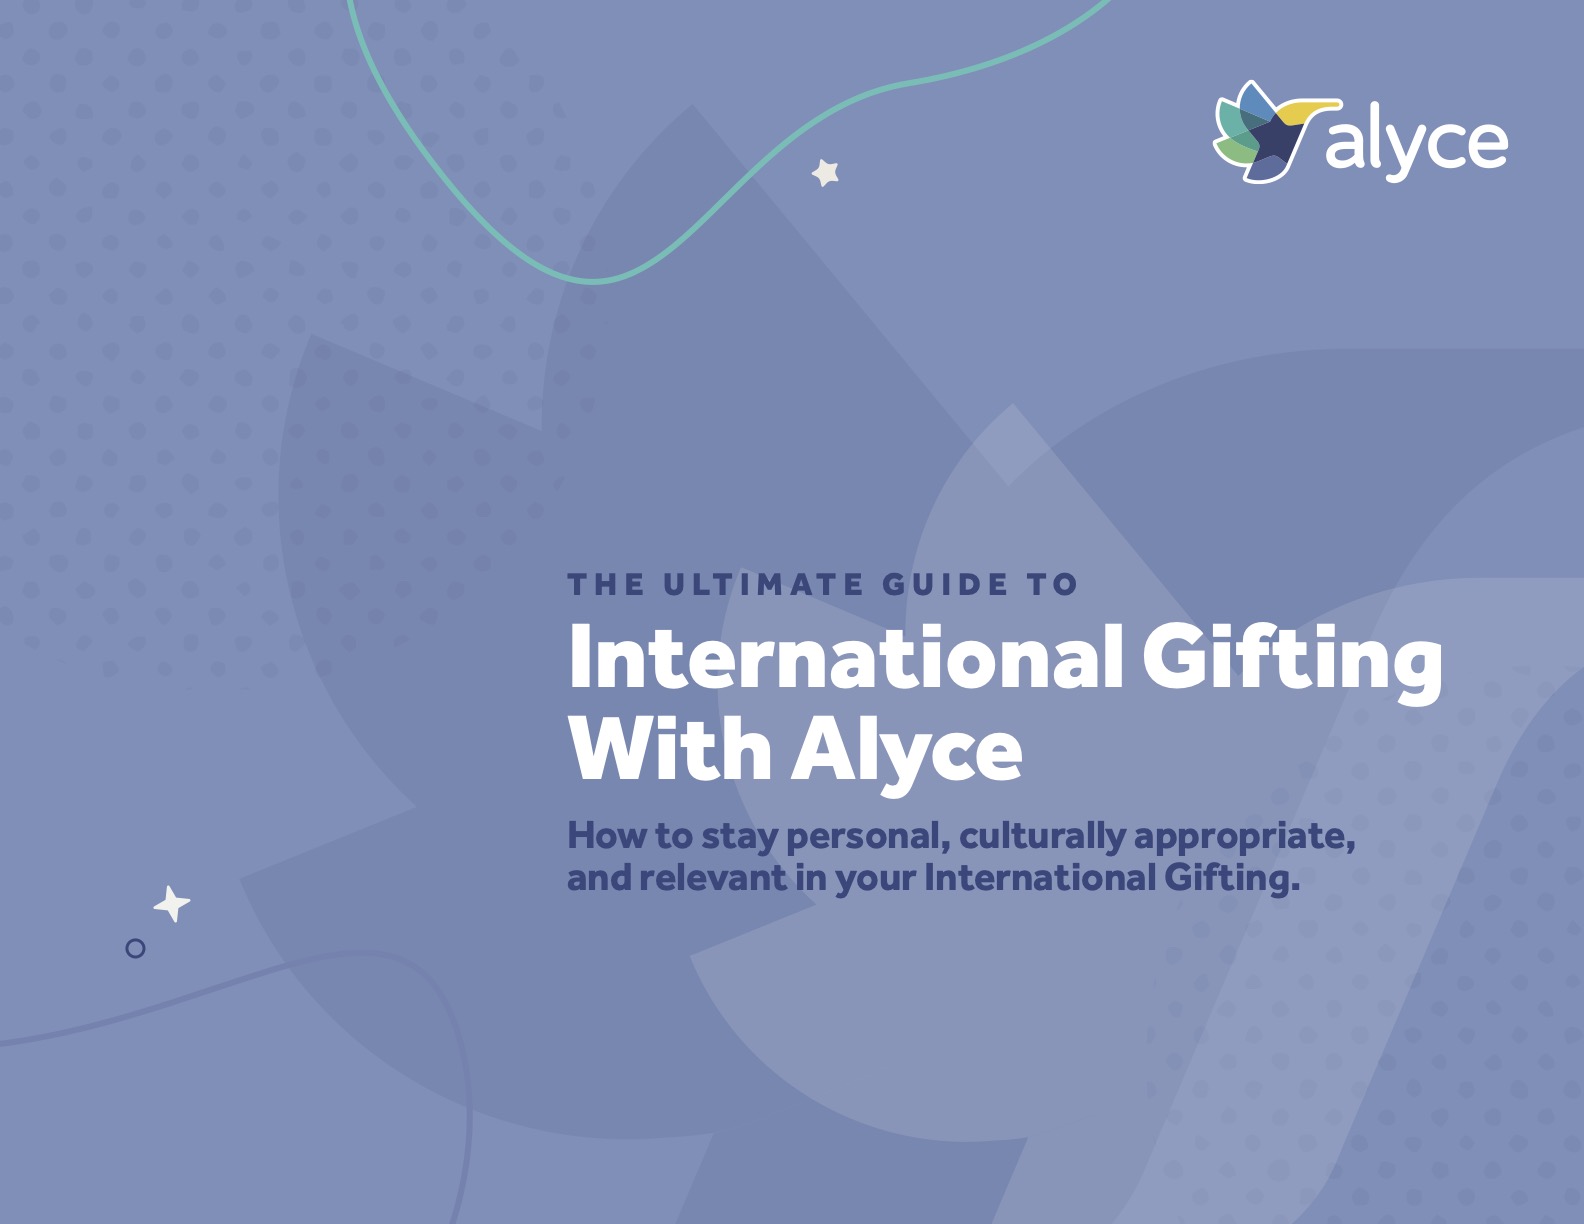 International Gifting Campaign Ideas